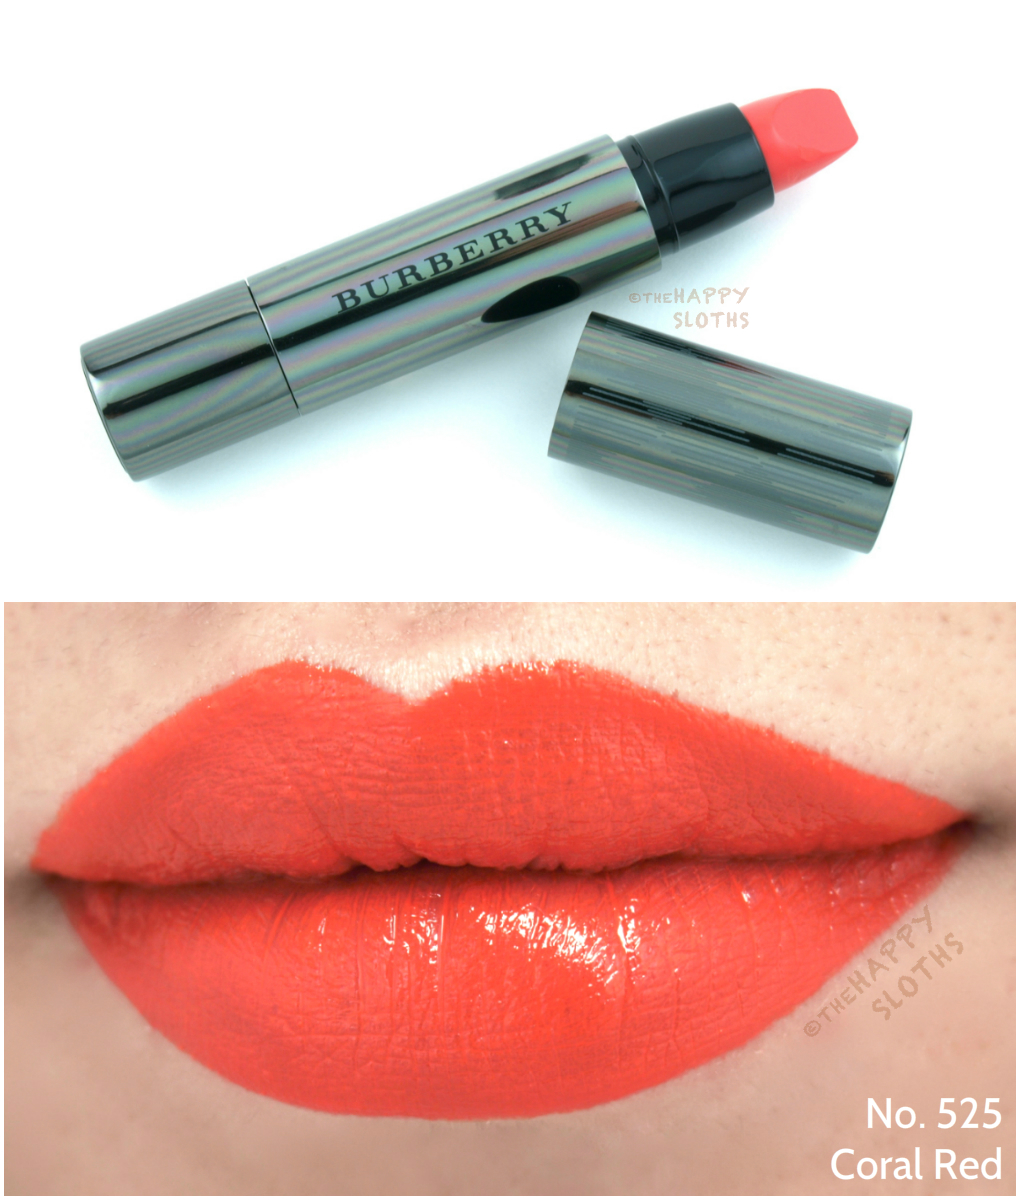 Burberry Full Kisses Lip Colors: Review and Swatches | The Happy Sloths ...